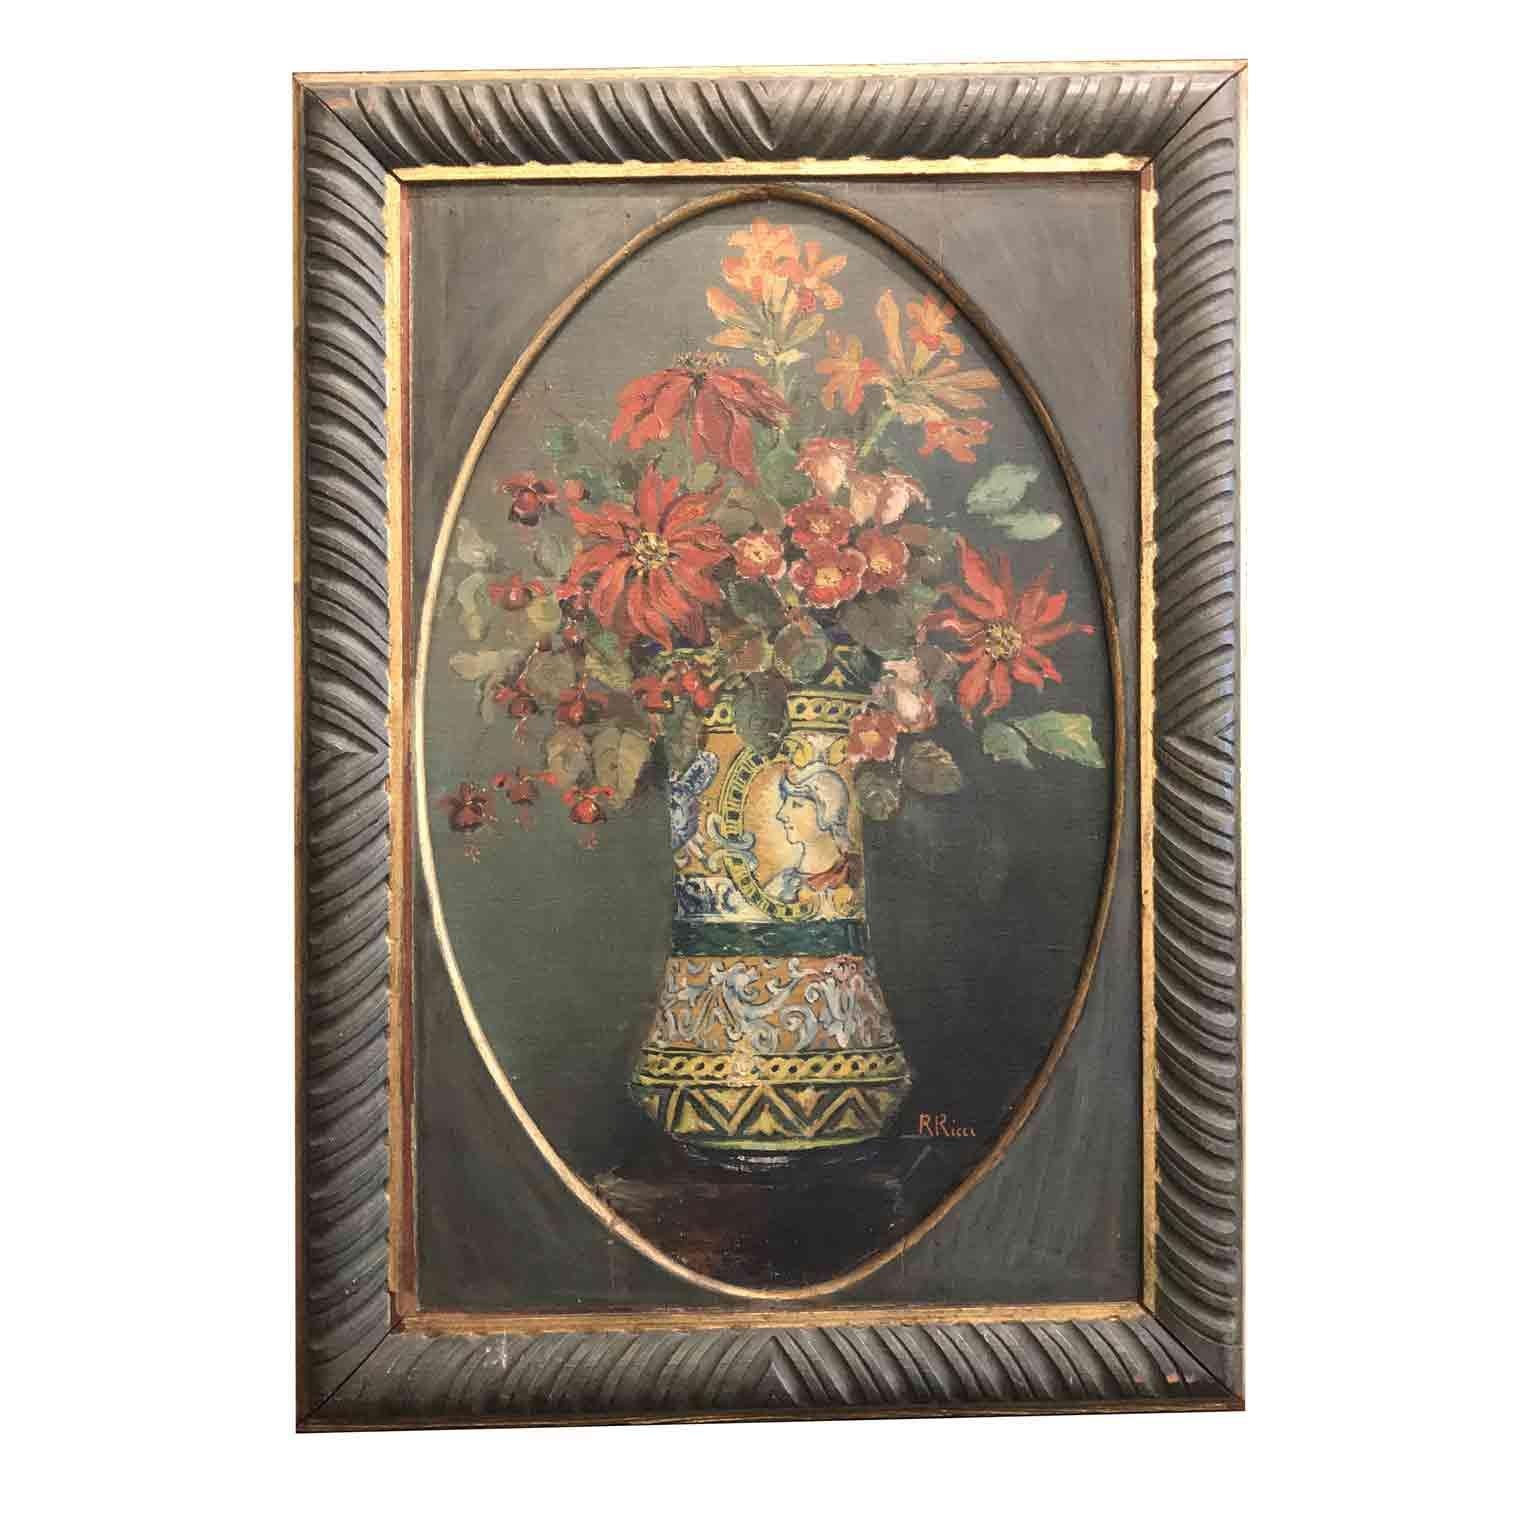 Pair of Italian Flower Still life Paintings by Ricci 20th Century Green Frames For Sale 1